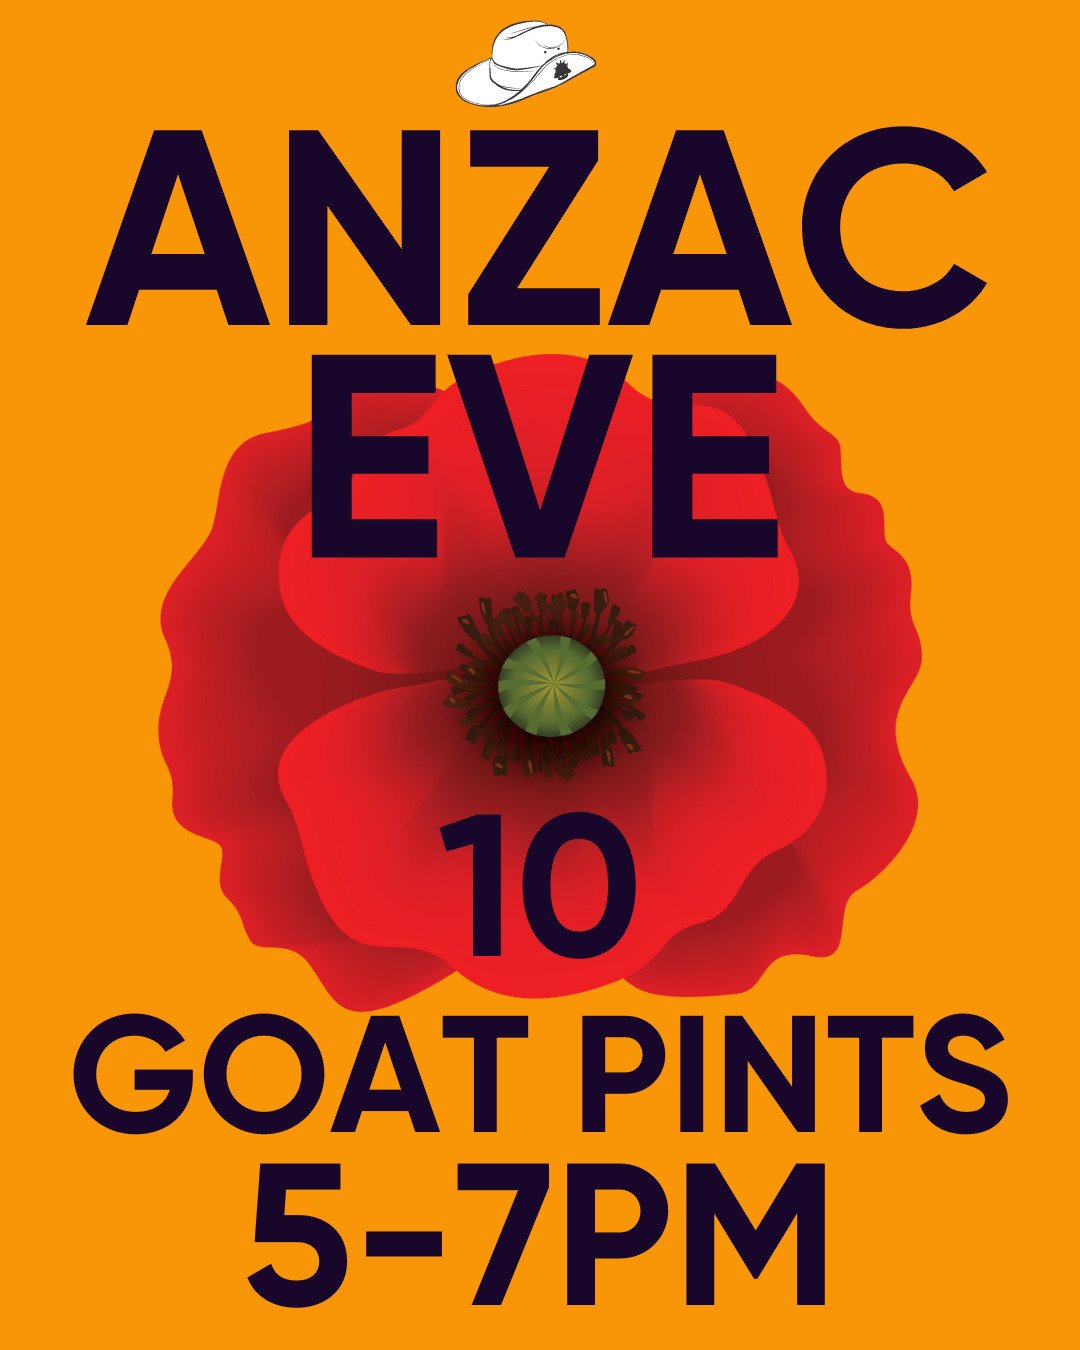 🍺 Get ready for ANZAC EVE with $10 goat pints at Jaga Jaga! From 5-7pm, enjoy our special &amp; place your weekly tips before kicking back to watch the footy. It's the ultimate pre-Anzac bash! 🎉 

#AnzacEve #DrinkSpecials #GameOn #HappyHour #FootyT